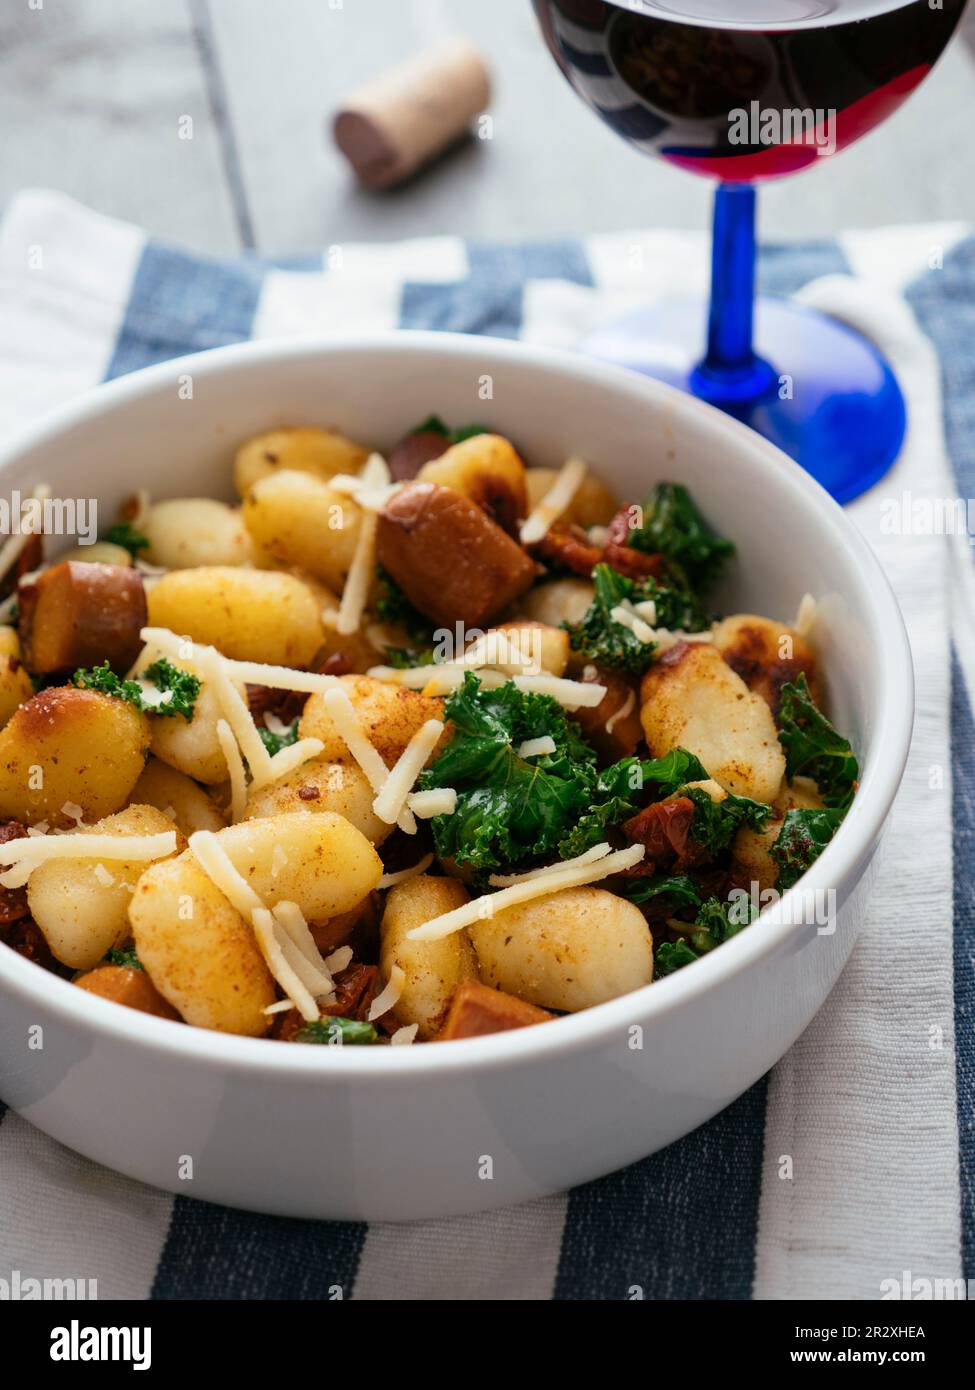 Gnocchi with Vegan Sausage, Kale and Sun-dried Tomatoes Stock Photo